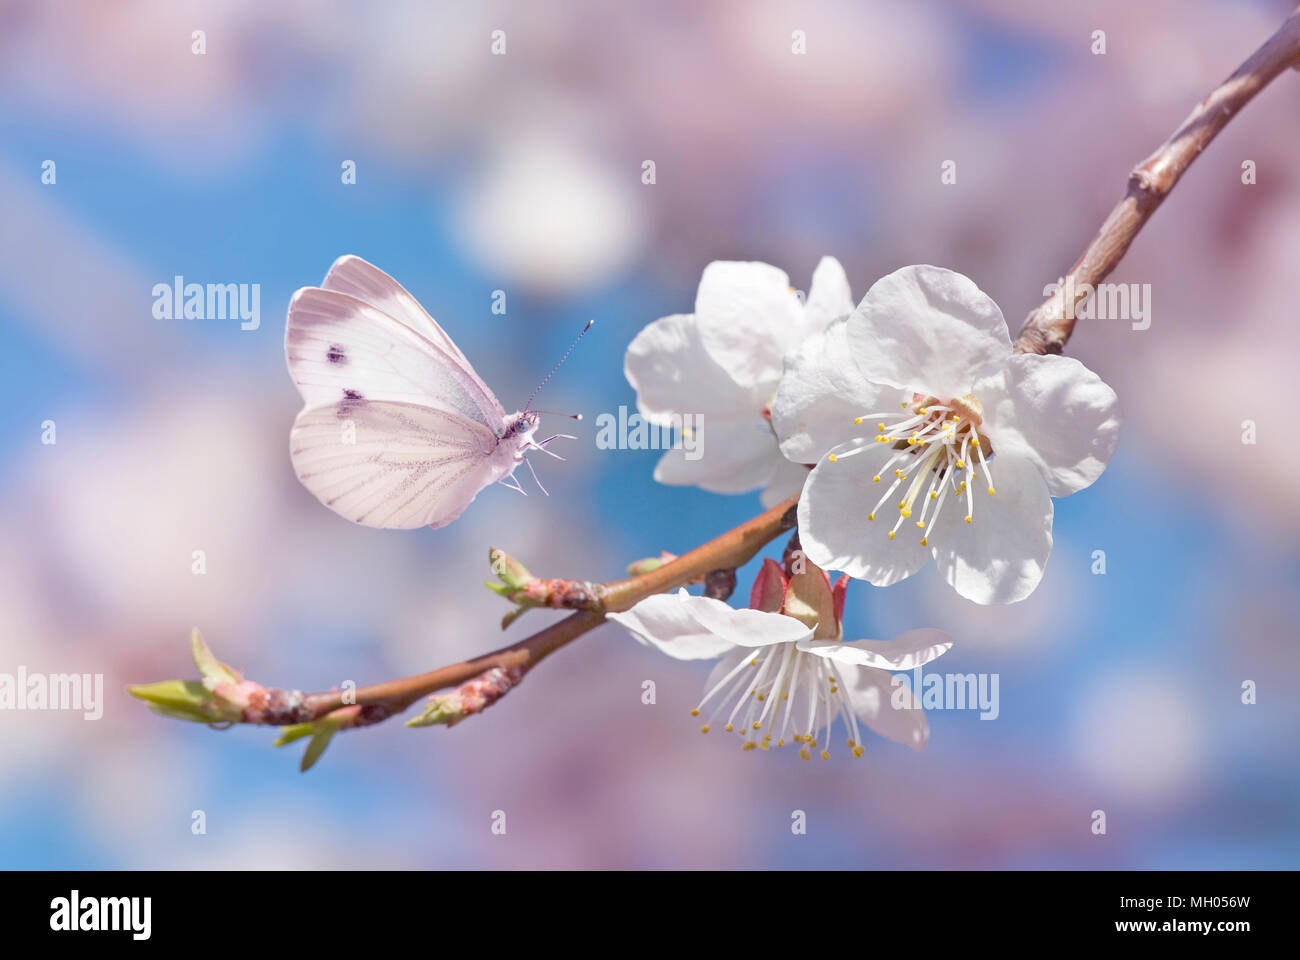 Beautiful white butterfly and branch of blossoming cherry in spring on blue and pink background close-up. Amazing elegant image of nature in early spr Stock Photo